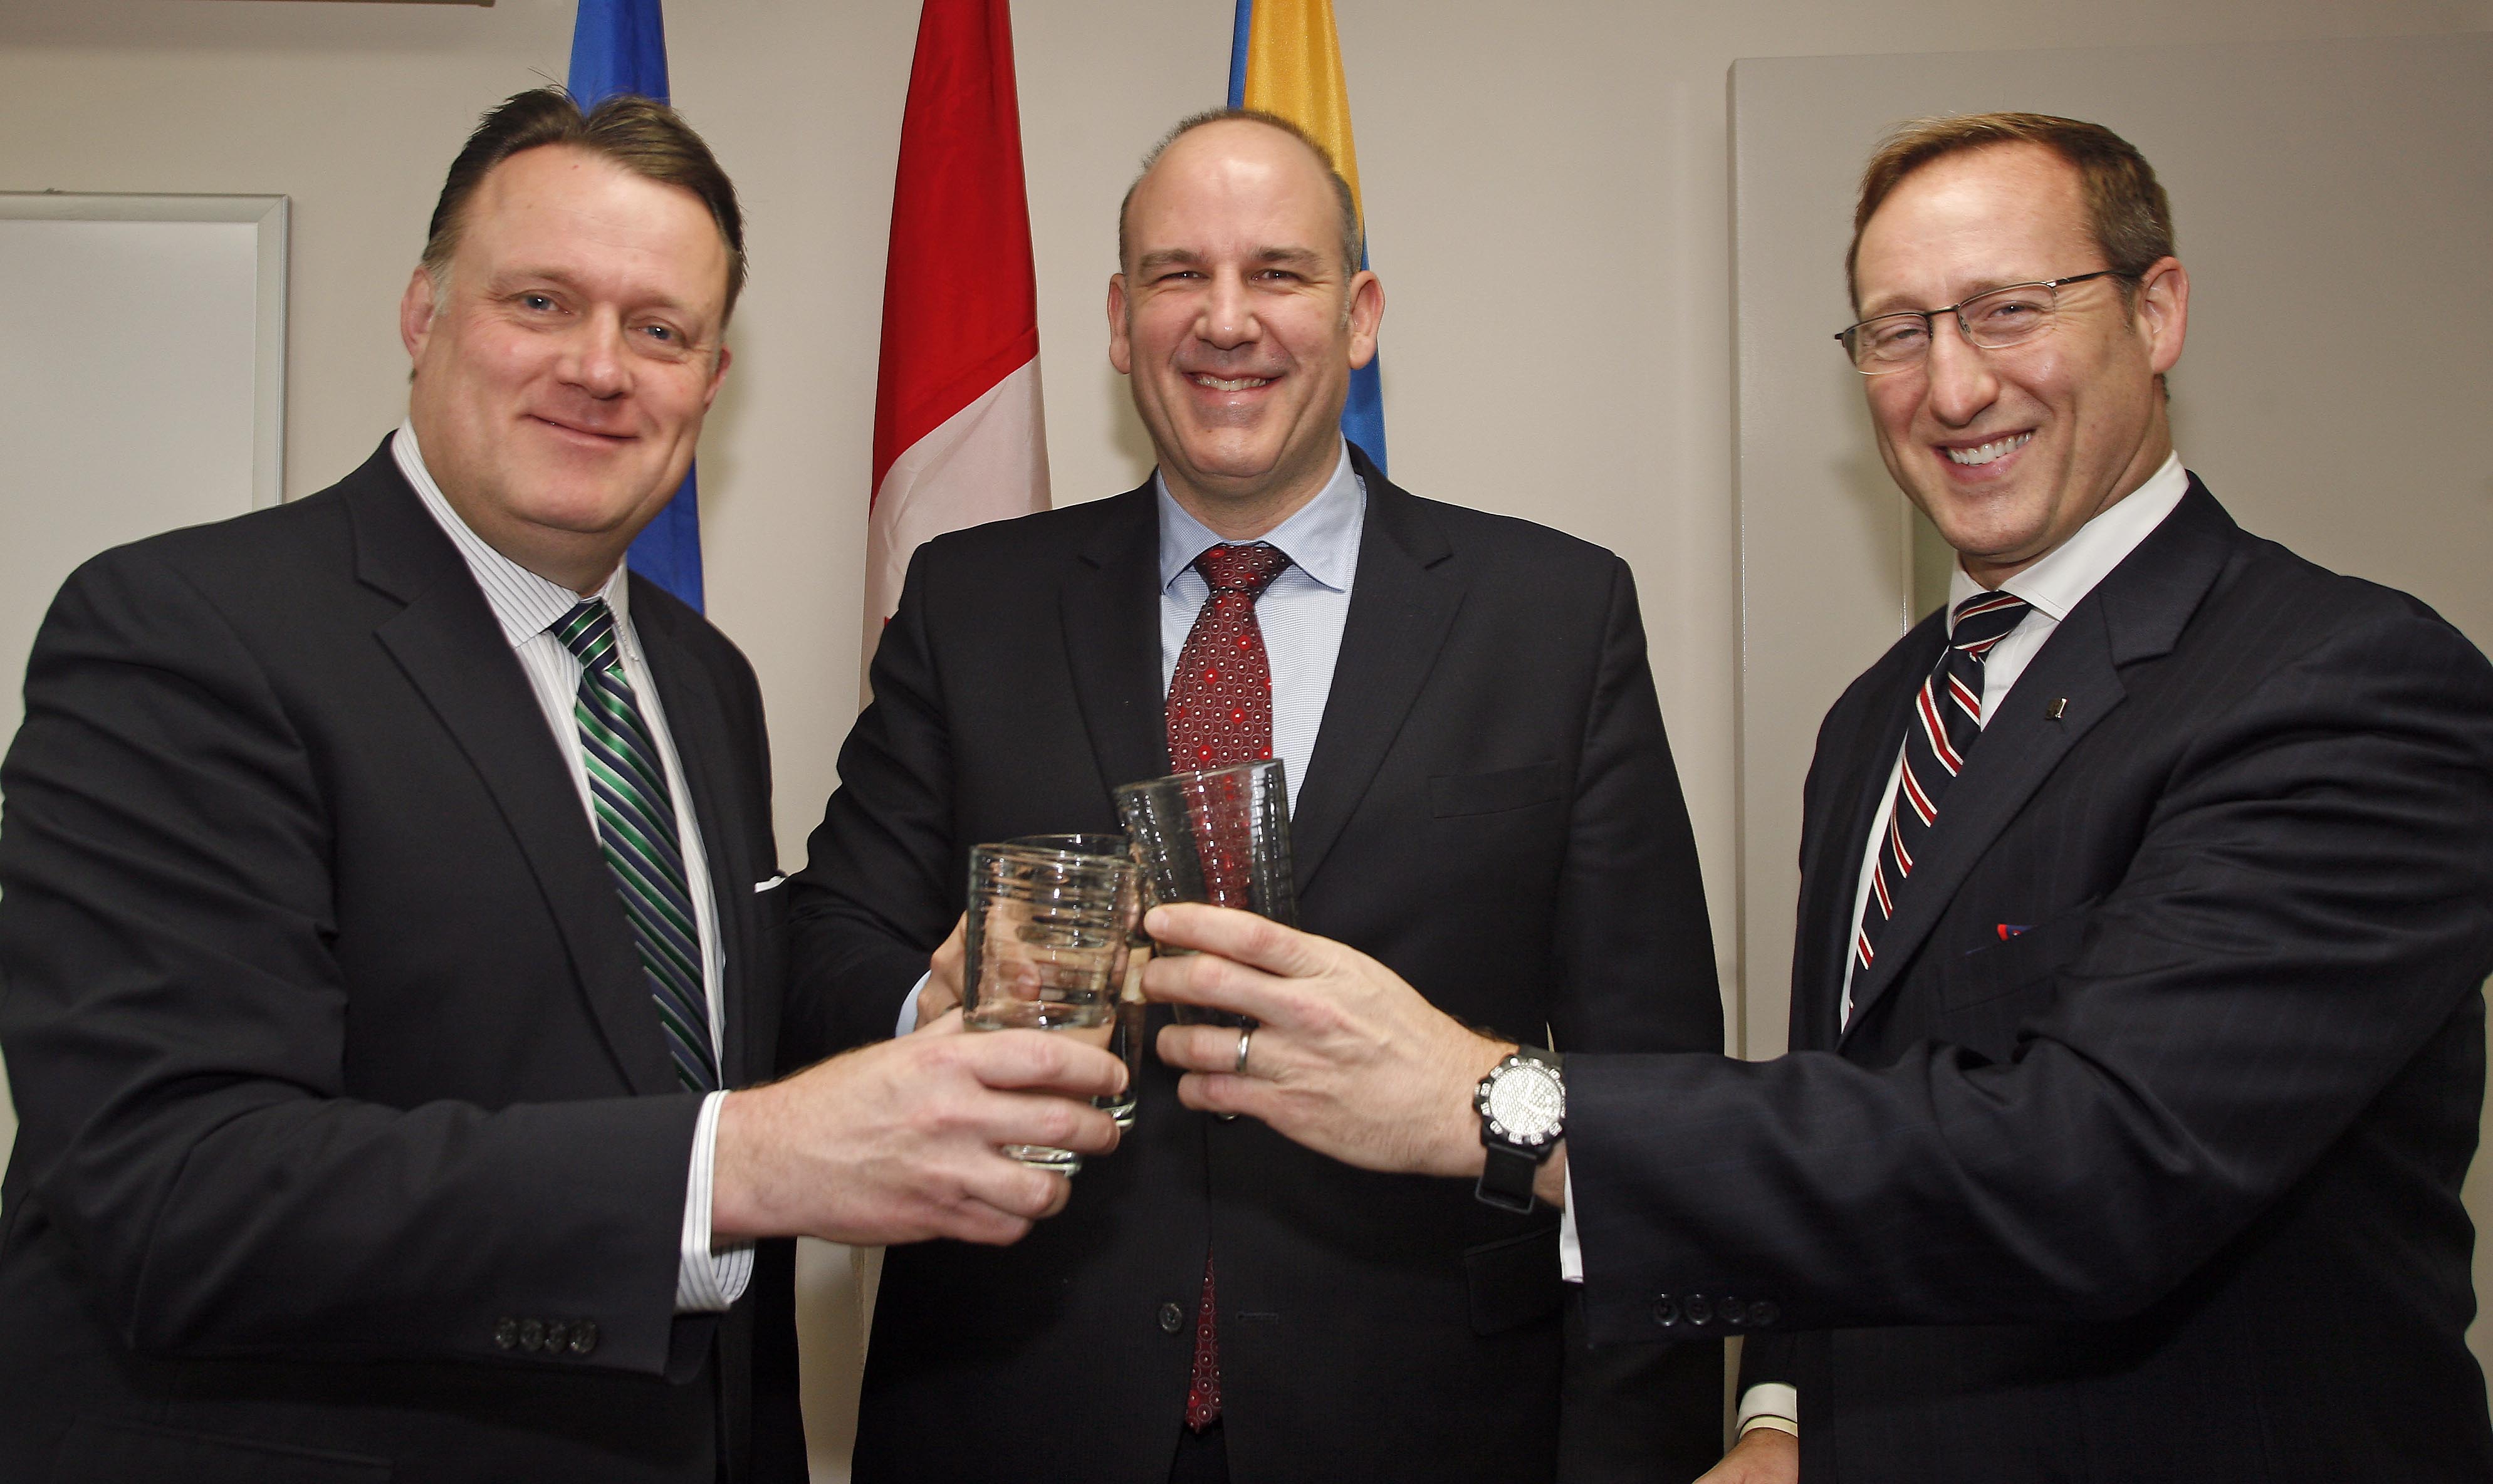 From left to right: Mike Savage, Mayor of the Halifax Regional Municipality, Labi Kousoulis, Nova Scotia Minister of the Public Service Commission and Minister of Internal Services and Peter MacKay, Member of Parliament for Central Nova, Regional Minister for Nova Scotia and Minister of Justice and Attorney General of Canada.